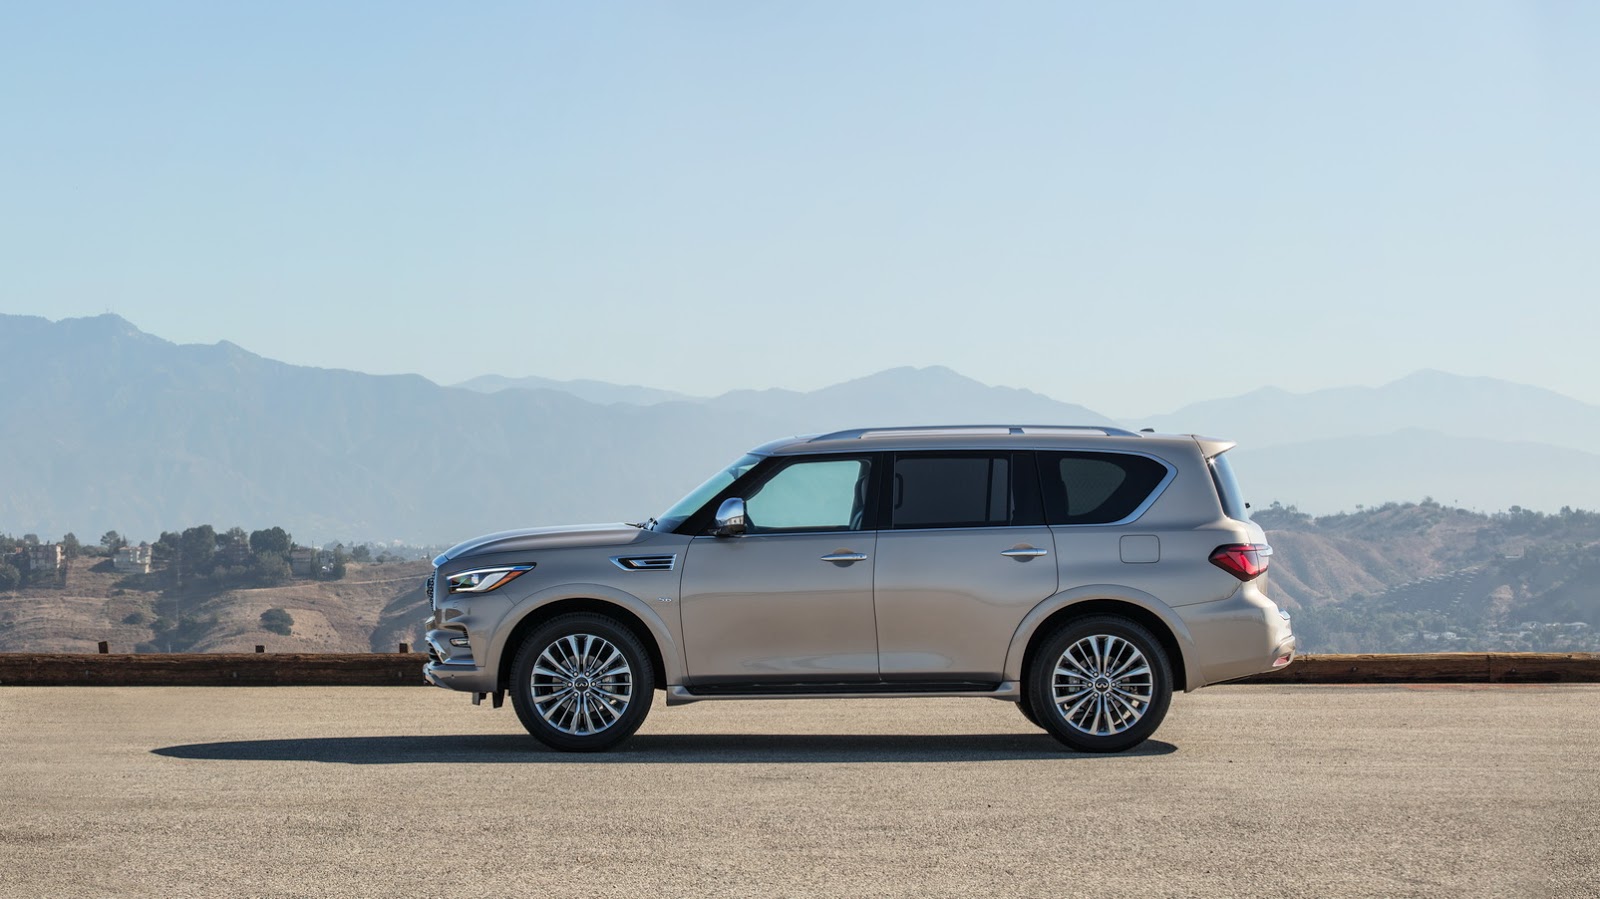 Infiniti Details 2018 QX80 Full-Size SUV, Priced From $64,750 | Carscoops